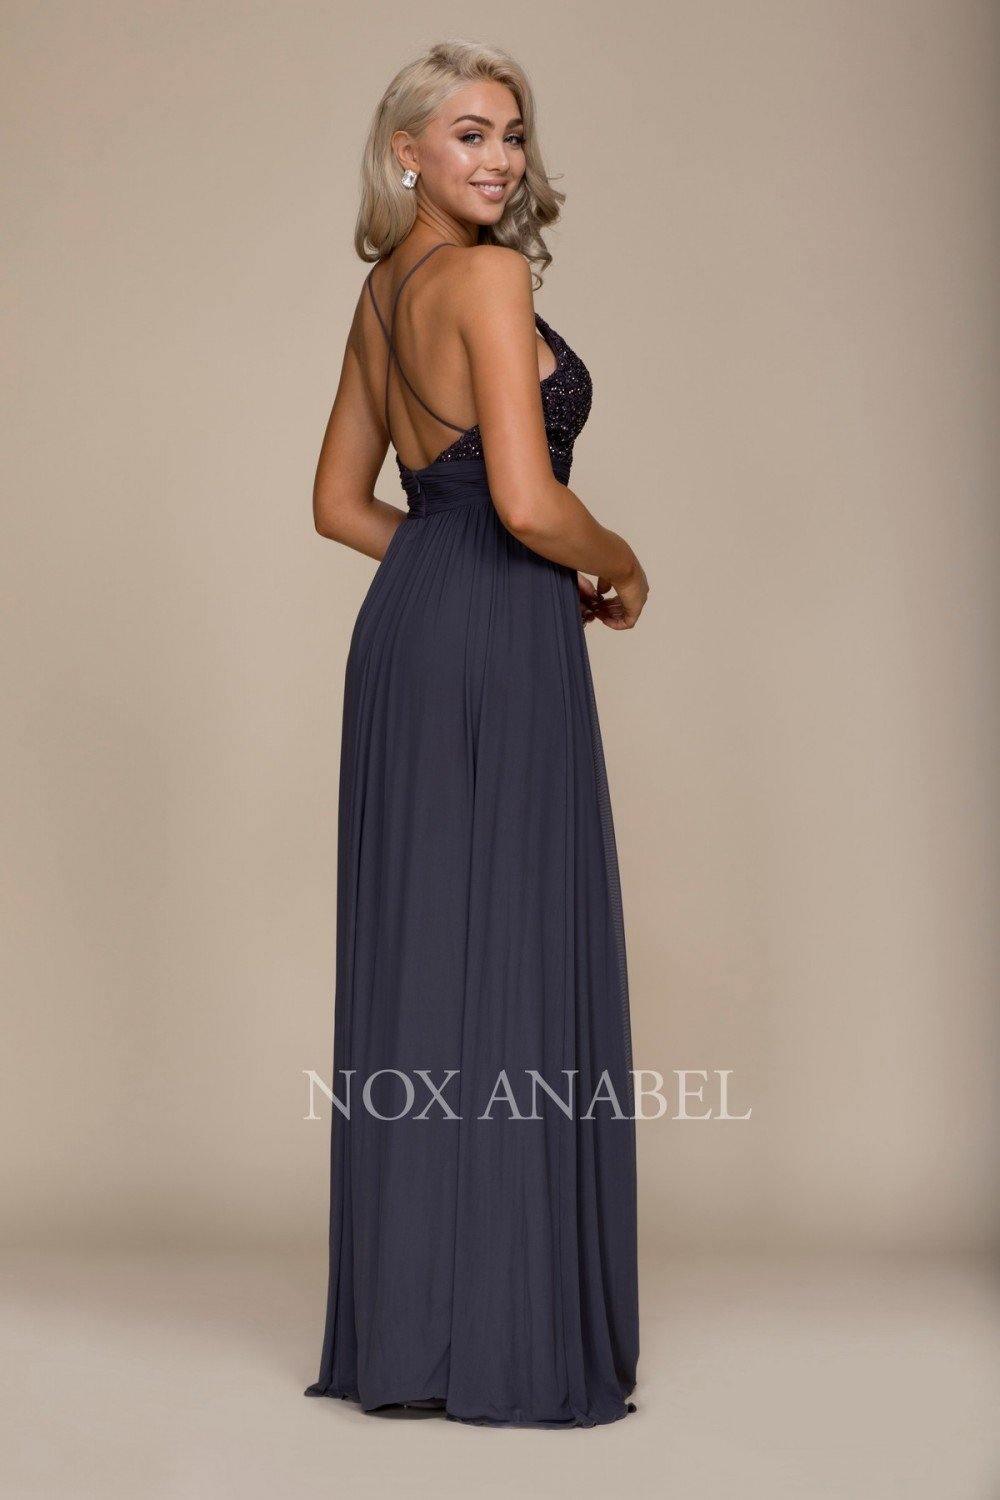 Prom Dress Formal Evening Gown Sale - The Dress Outlet